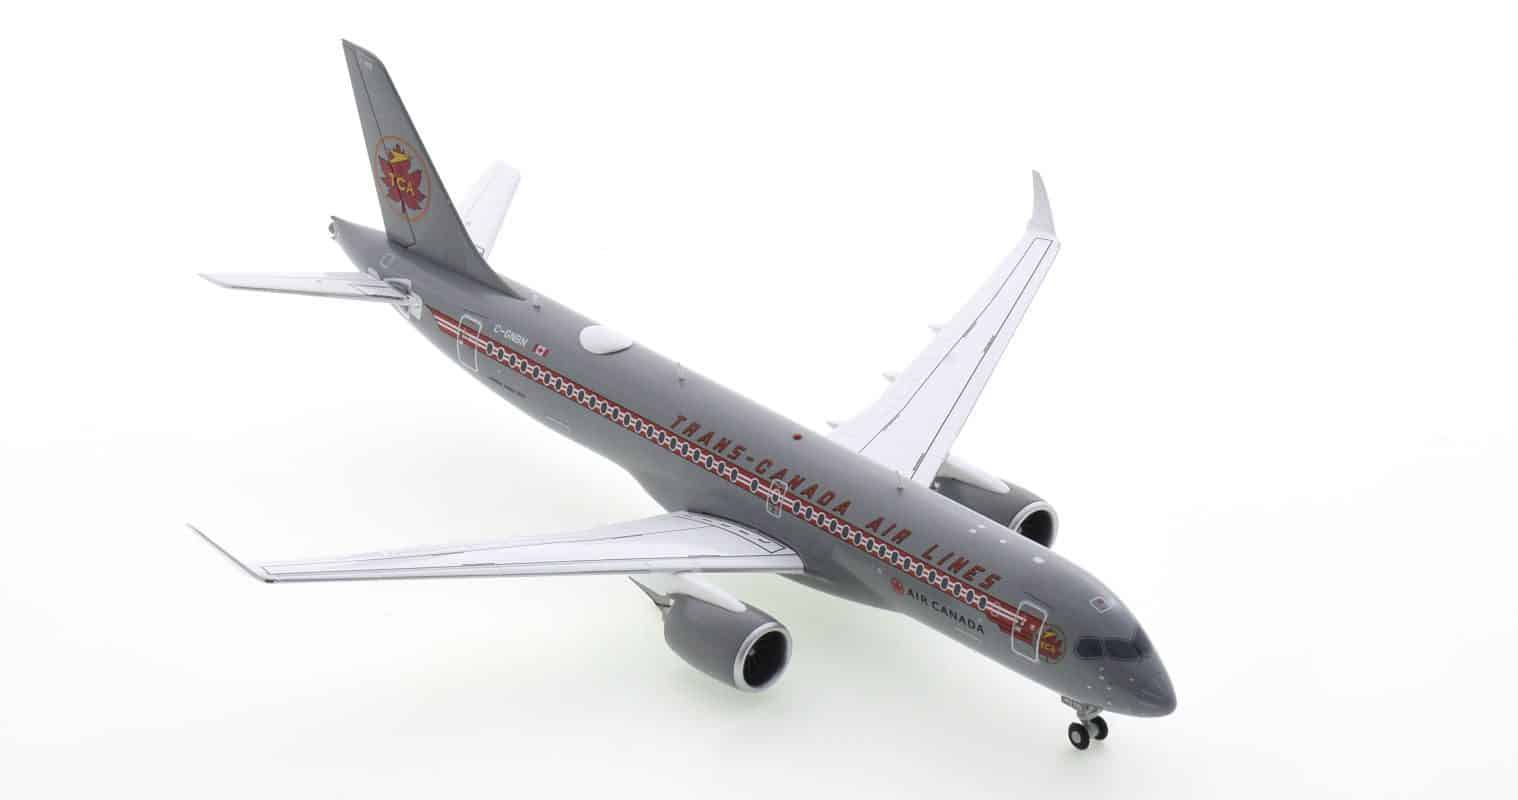 Front starboard side view of G2ACA999 -  Airbus A220-300 1/200 scale diecast model, registration C-GNBN in Air Canada's 